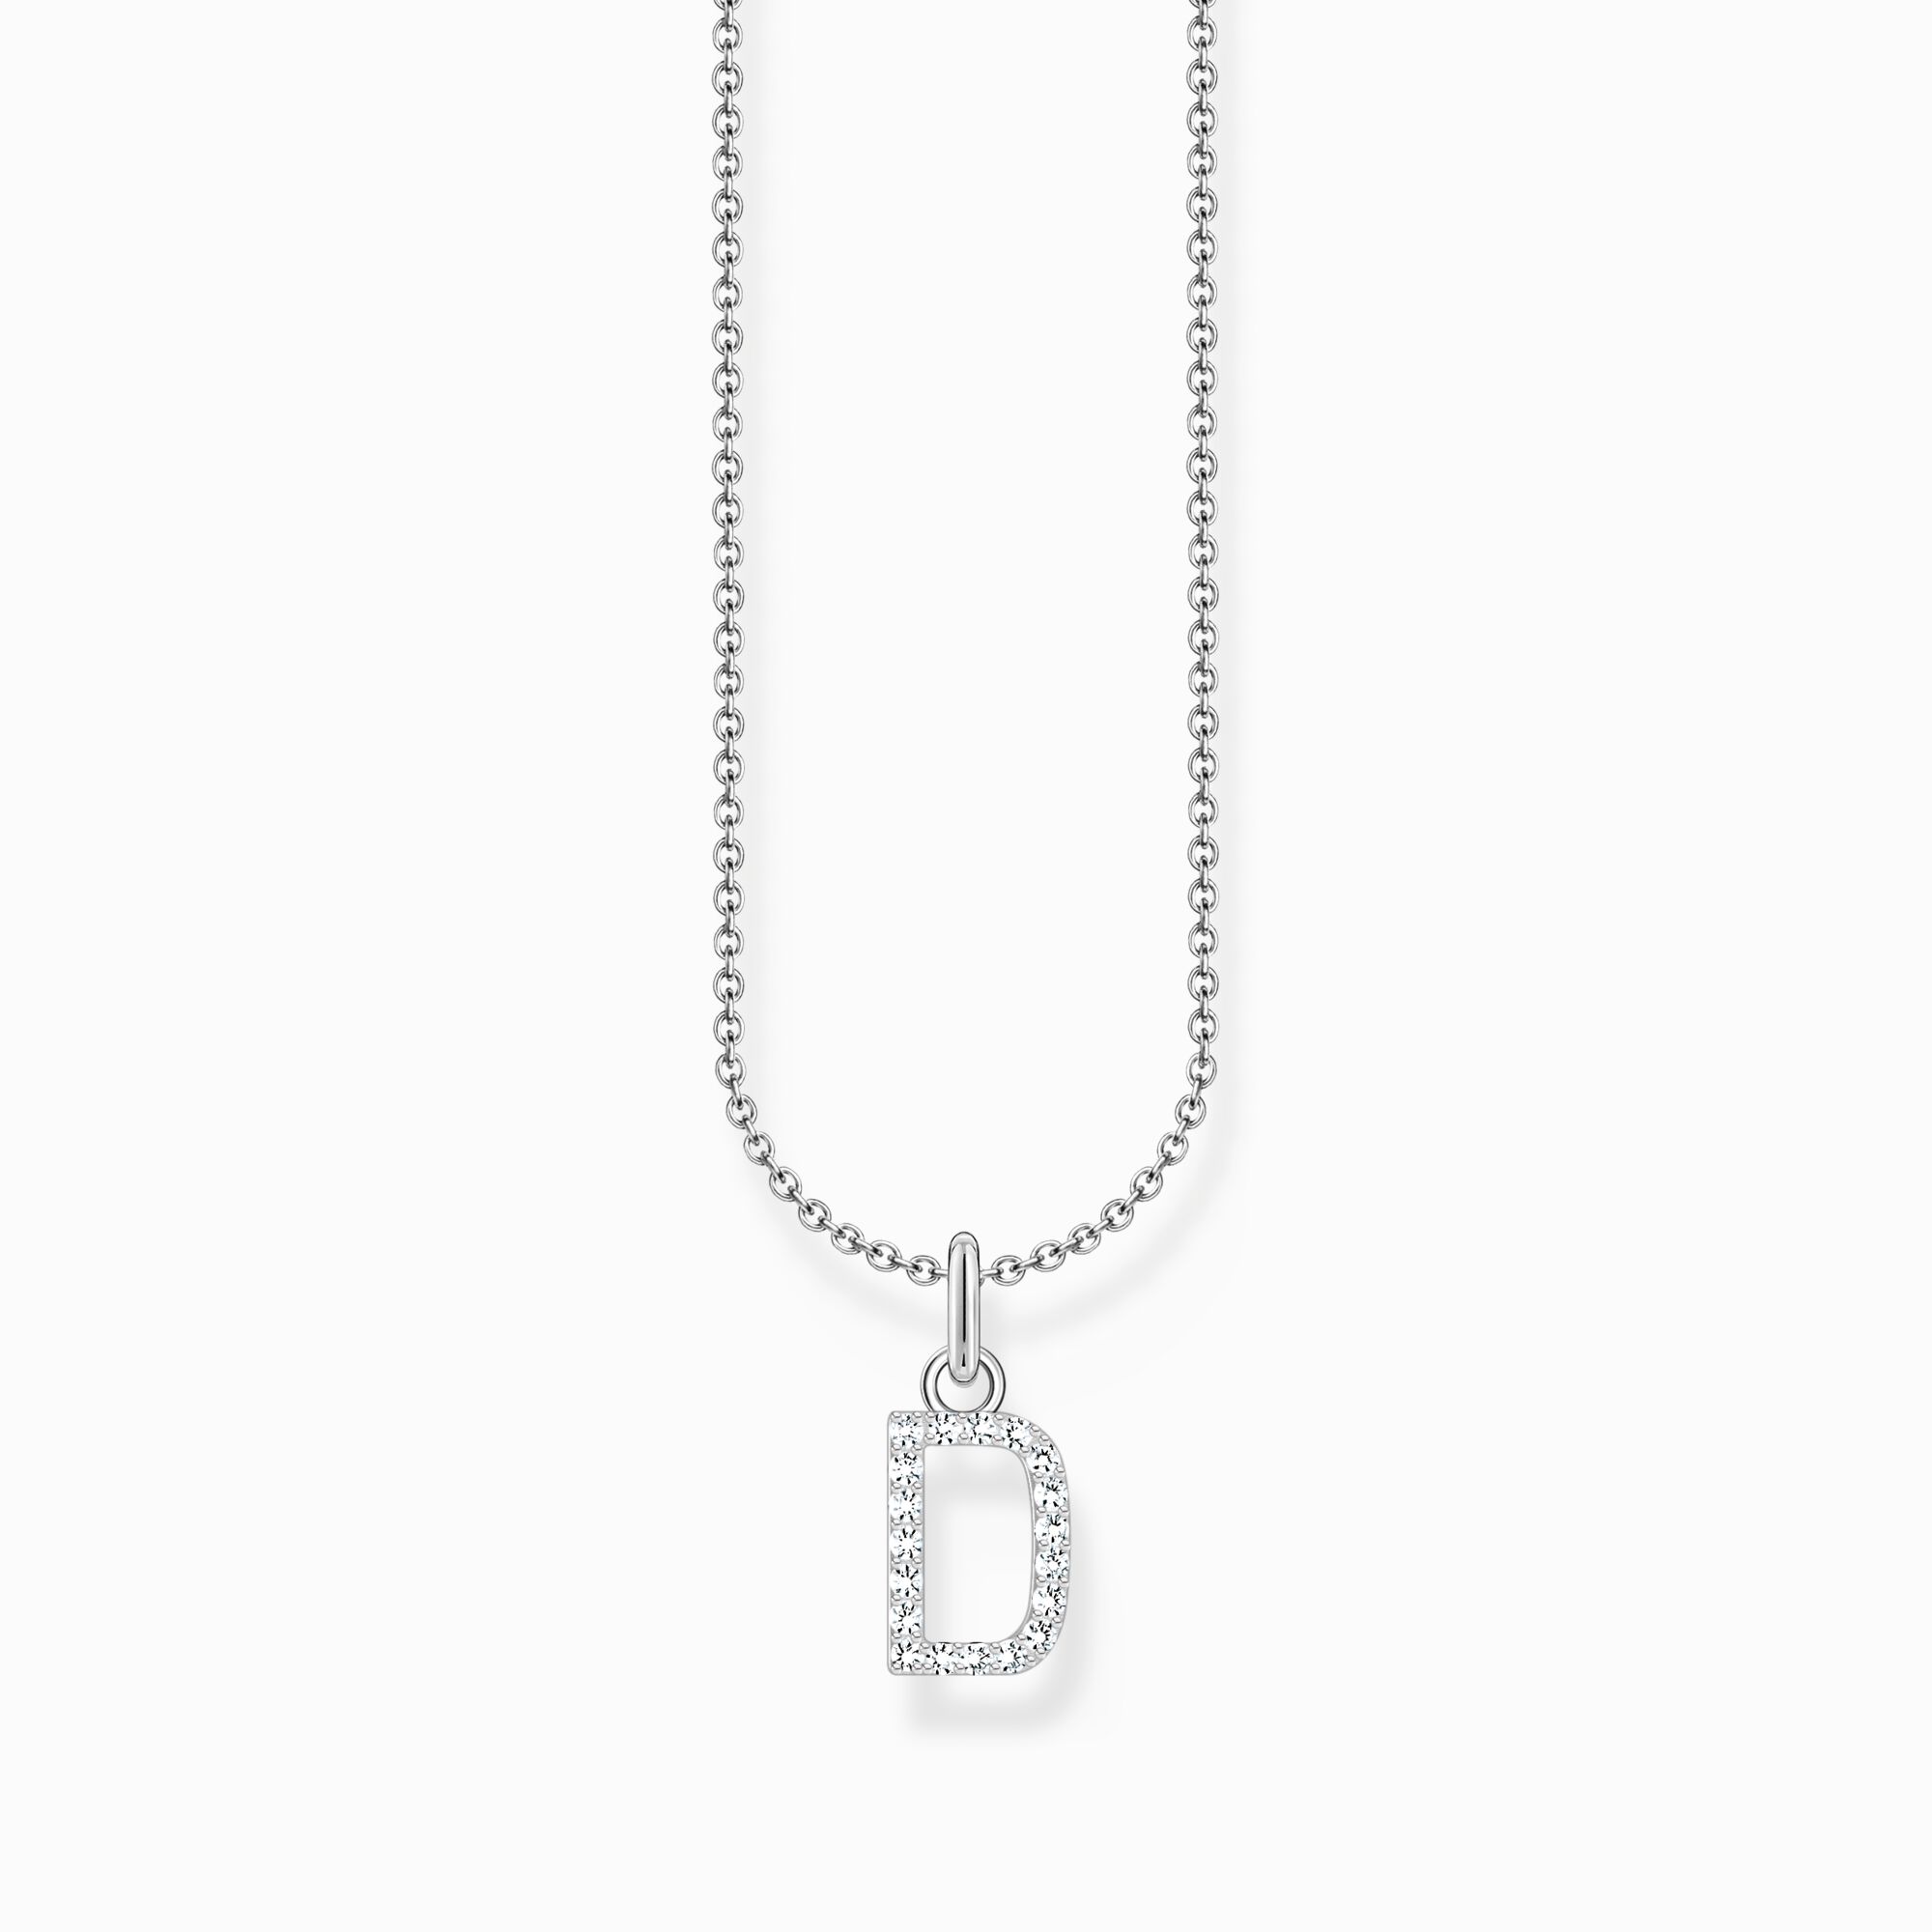 Silver necklace with letter pendant D and white zirconia from the Charming Collection collection in the THOMAS SABO online store